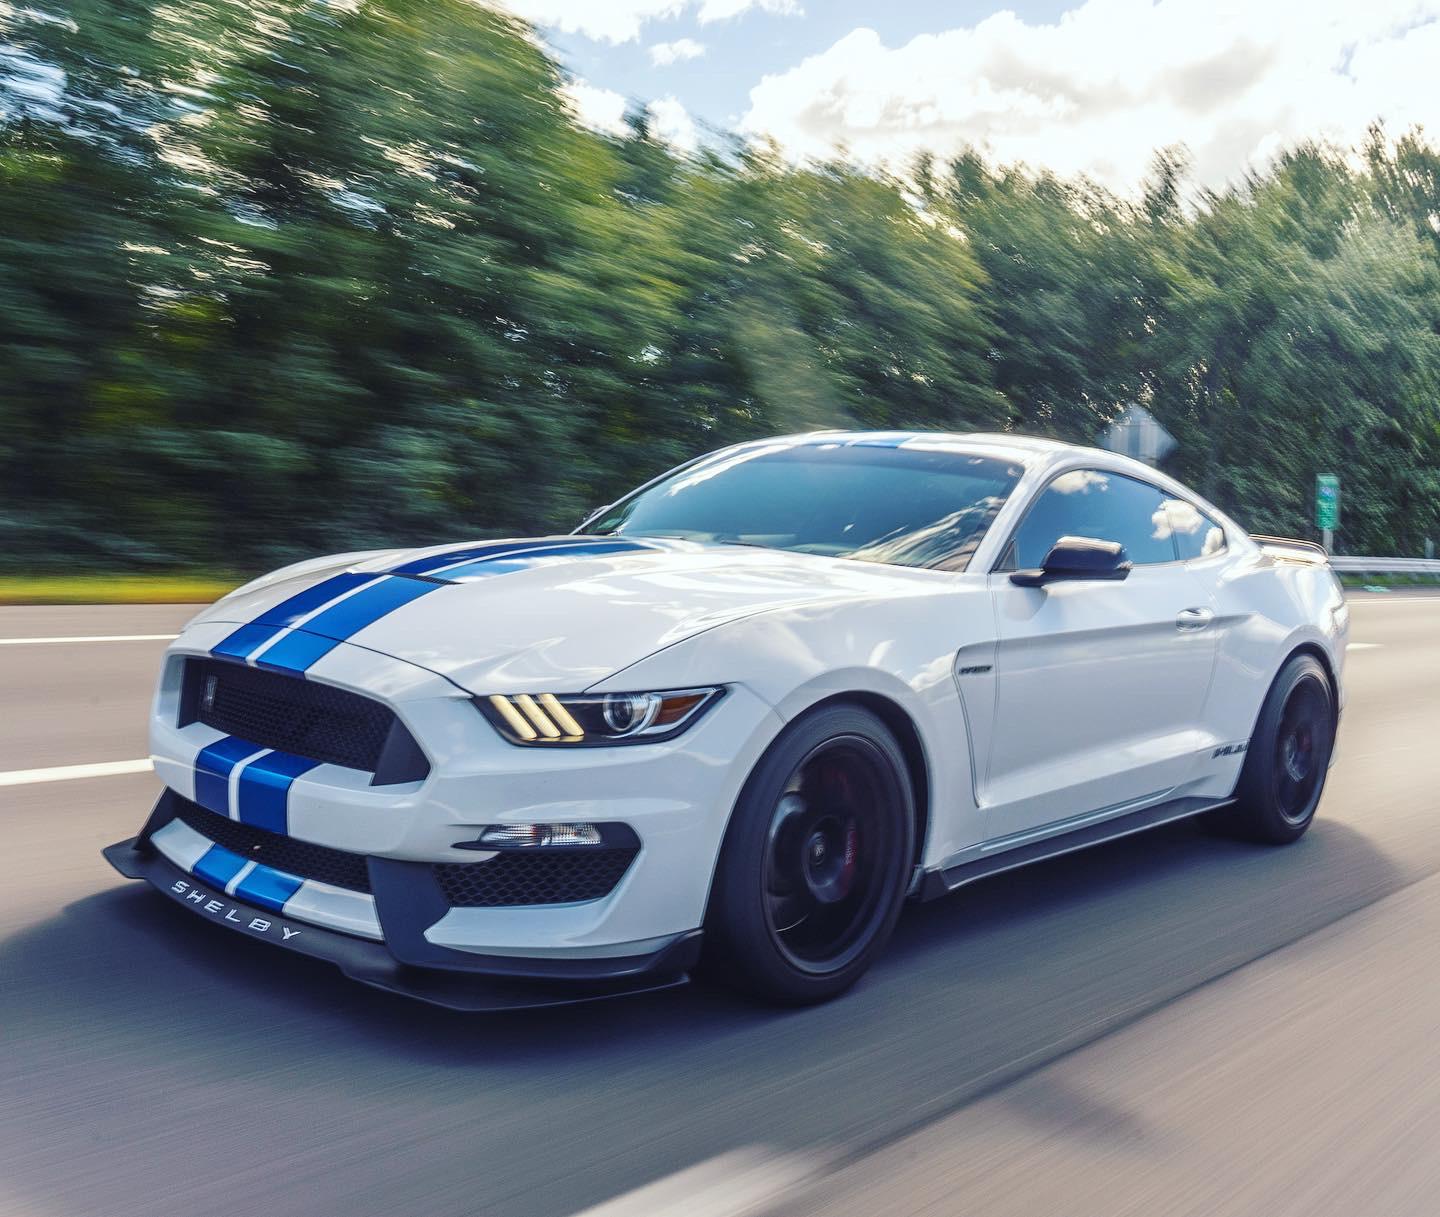 2018 GT350 Rolling shot from this summer [OS]